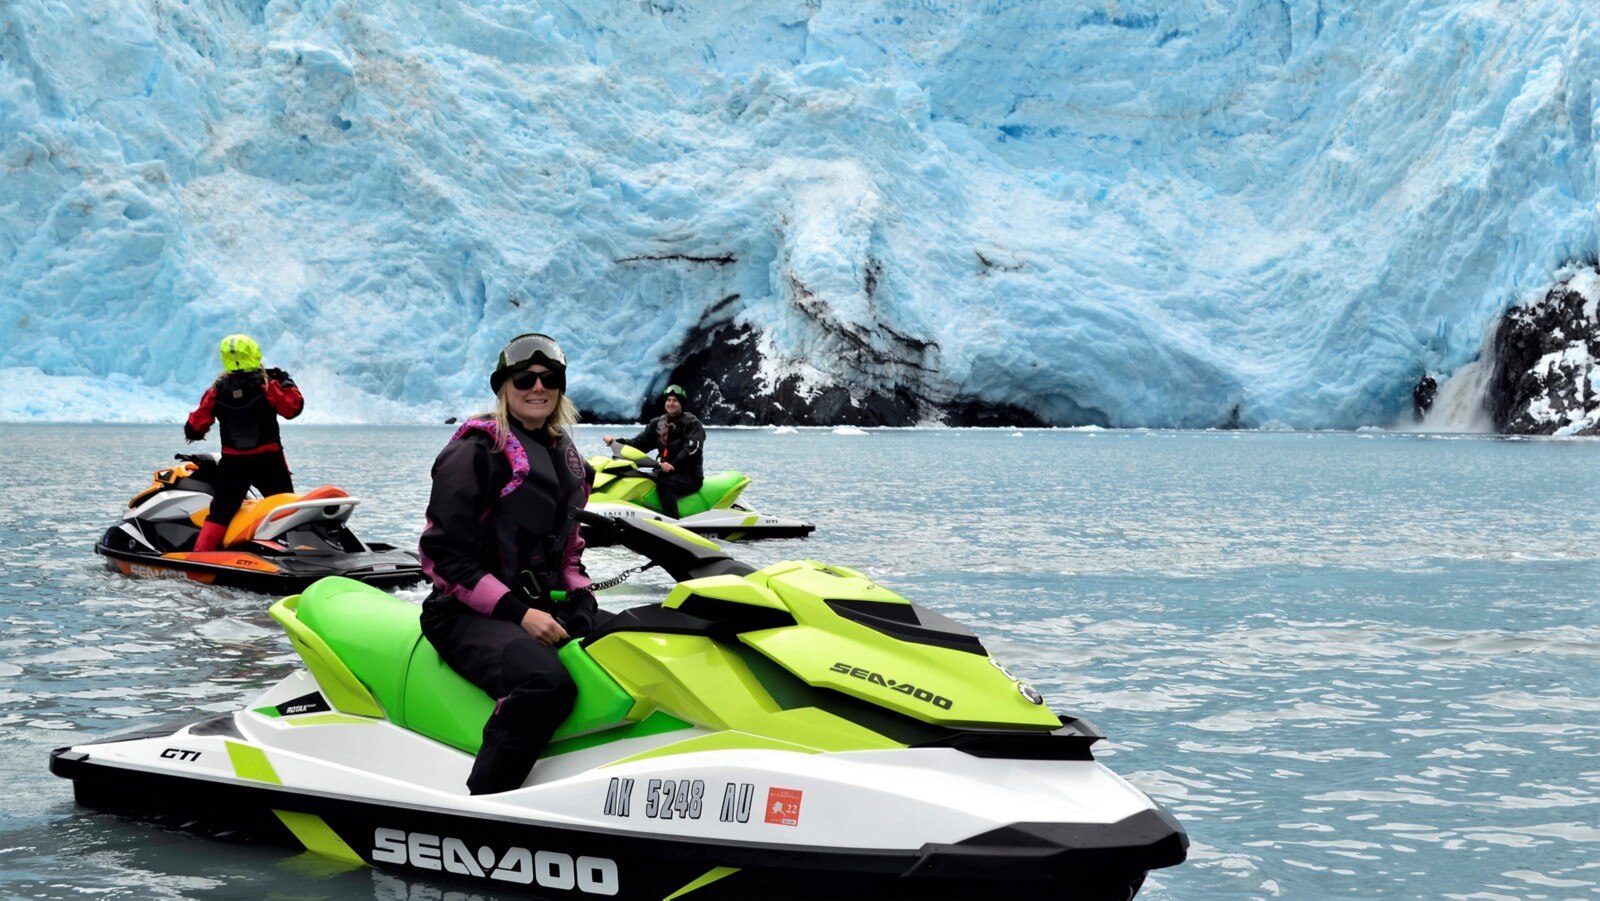 A group of people on personal watercraft in Alaska